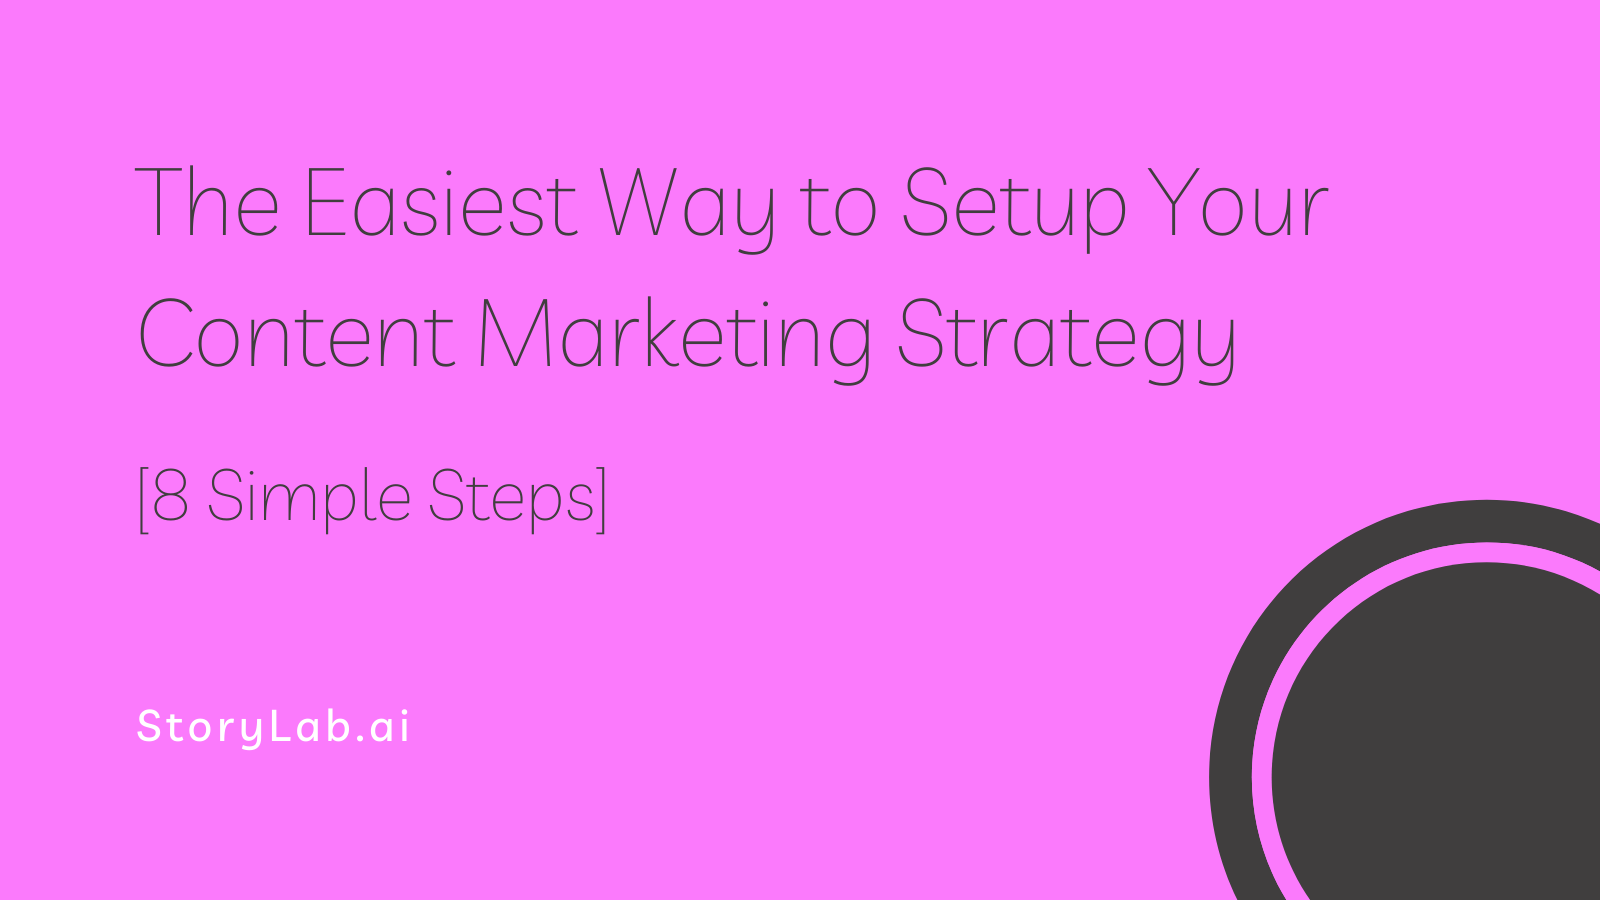 The Easiest Way to Setup Your Content Marketing Strategy [8 Steps]